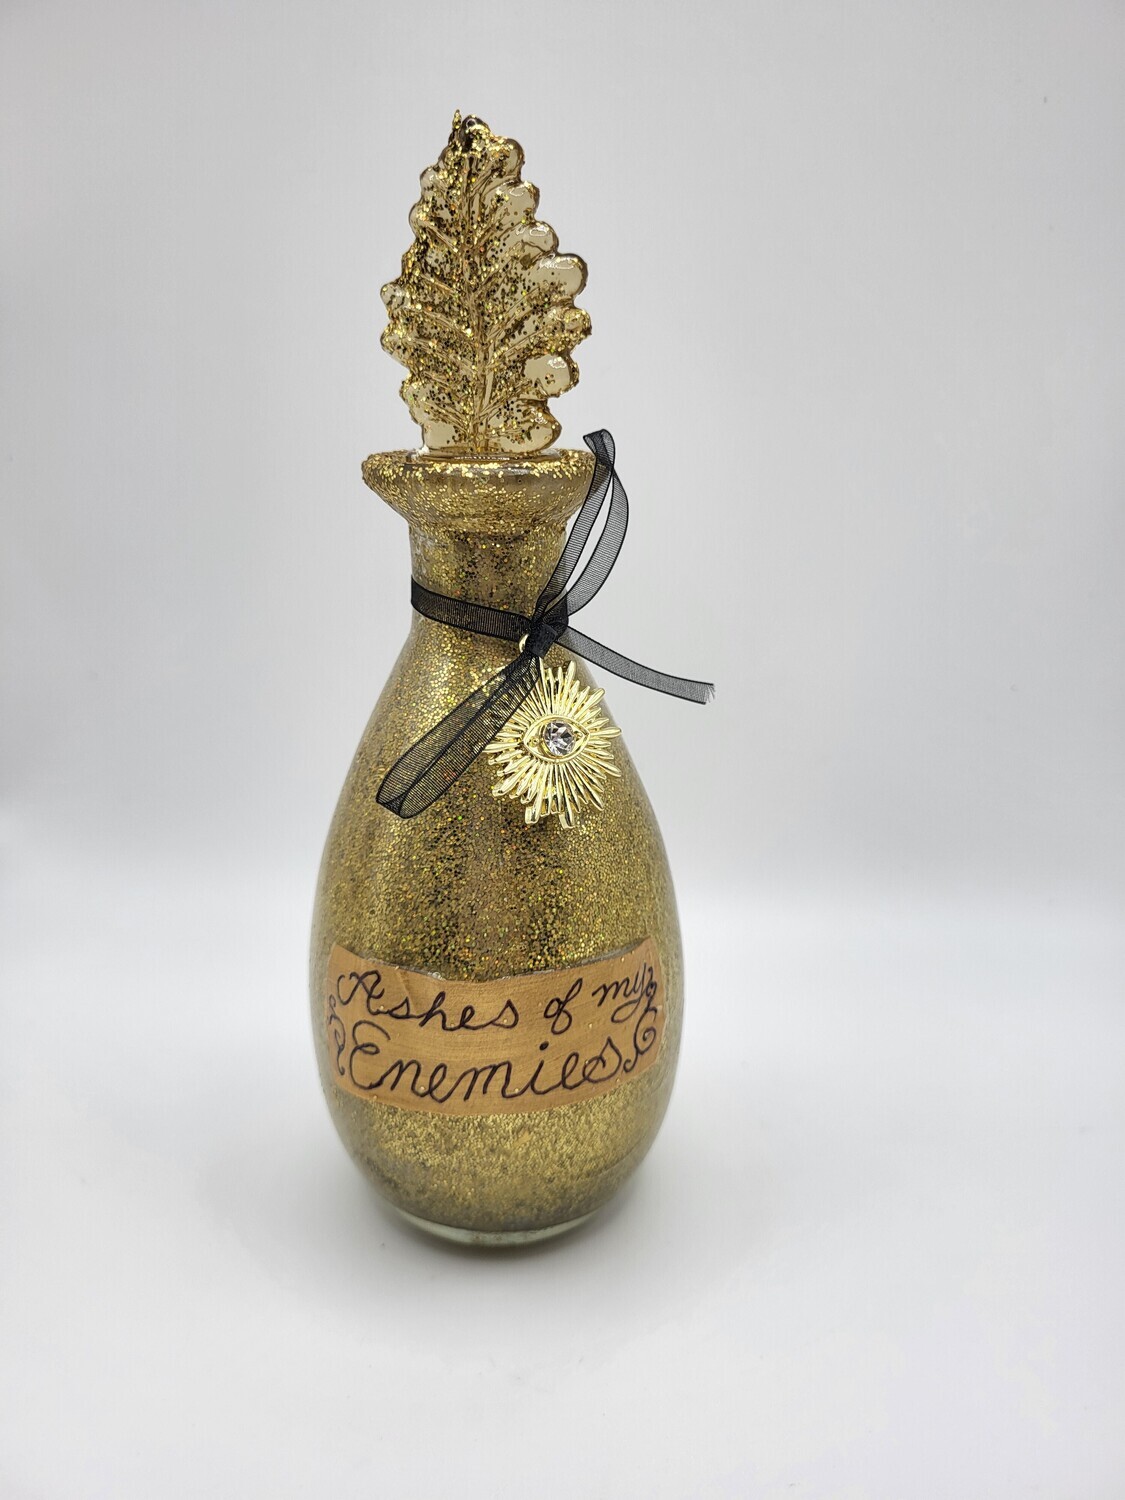 Gold "Ashes of my Enemies" bottle 1